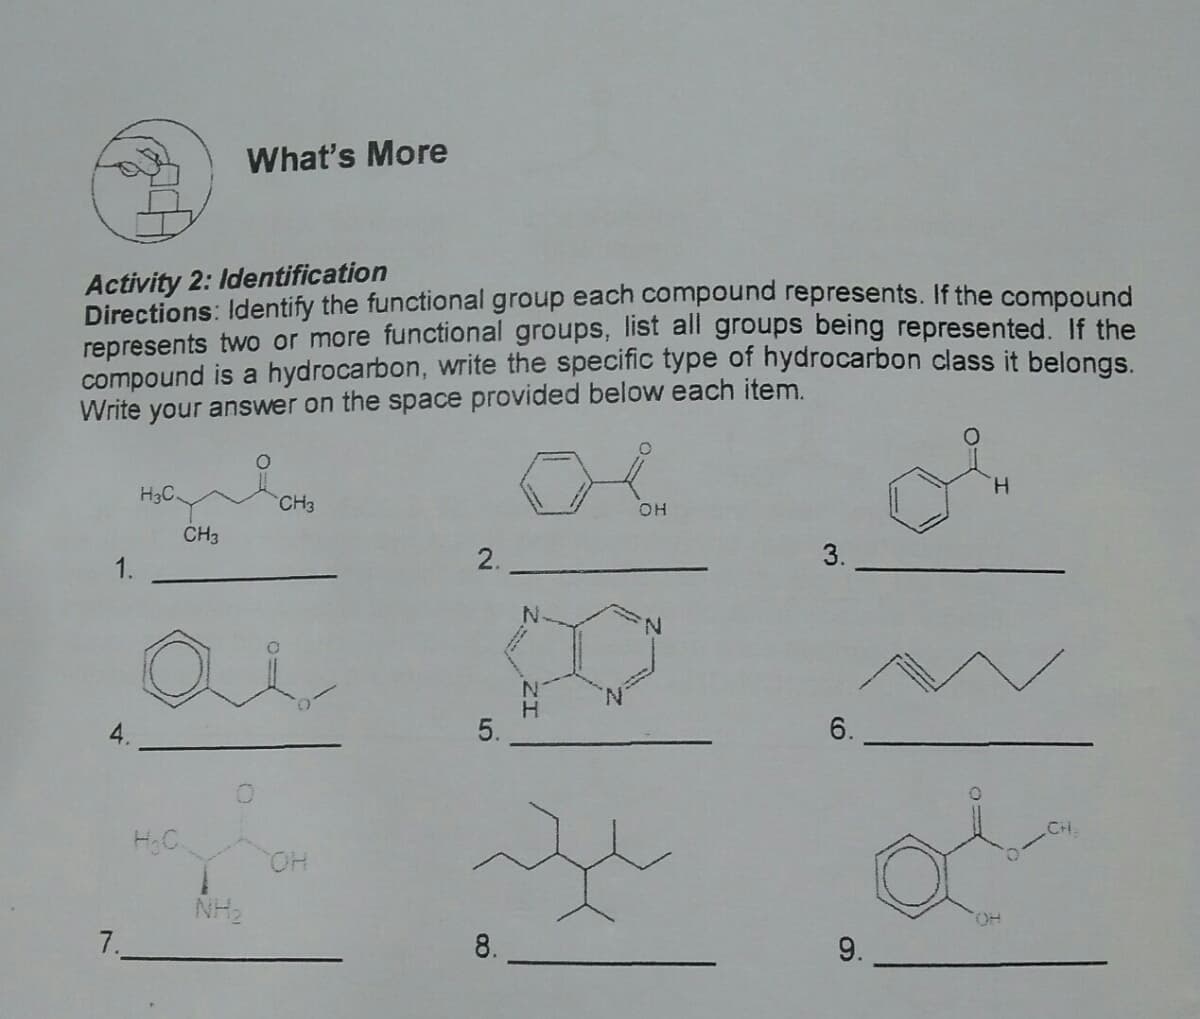 What's More
Activity 2: Identification
Directions: Identify the functional group each compound represents. If the compound
represents two or more functional groups, list all groups being represented. If the
compound is a hydrocarbon, write the specific type of hydrocarbon class it belongs.
Write your answer on the space provided below each item.
H.
H3C
CH3
CH3
2.
3.
1.
N.
5.
6.
CH
HC
HO.
NH2
HO.
7.
8.
9.
ZI
